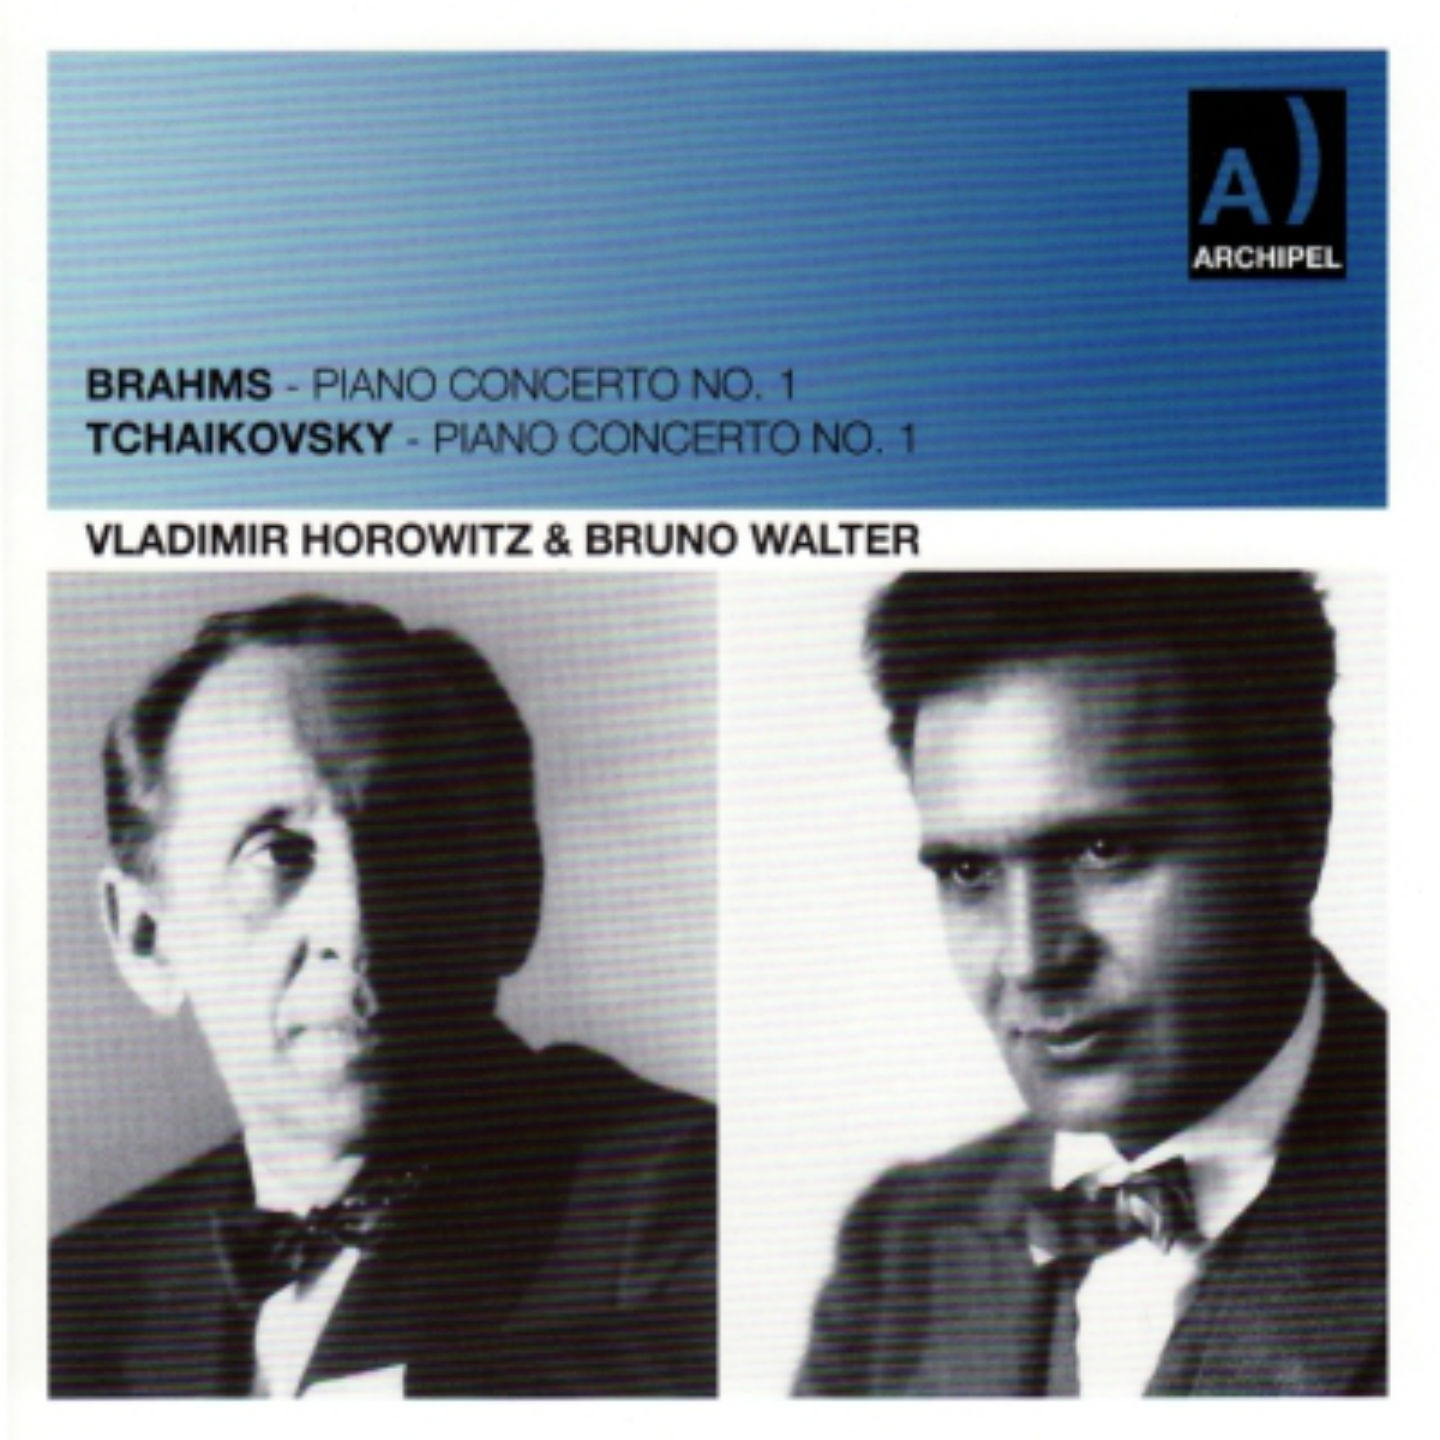 Concerto for Piano and Orchestra No. 1 in D Minor, Op. 15: I. Maestoso (Pt. 1)